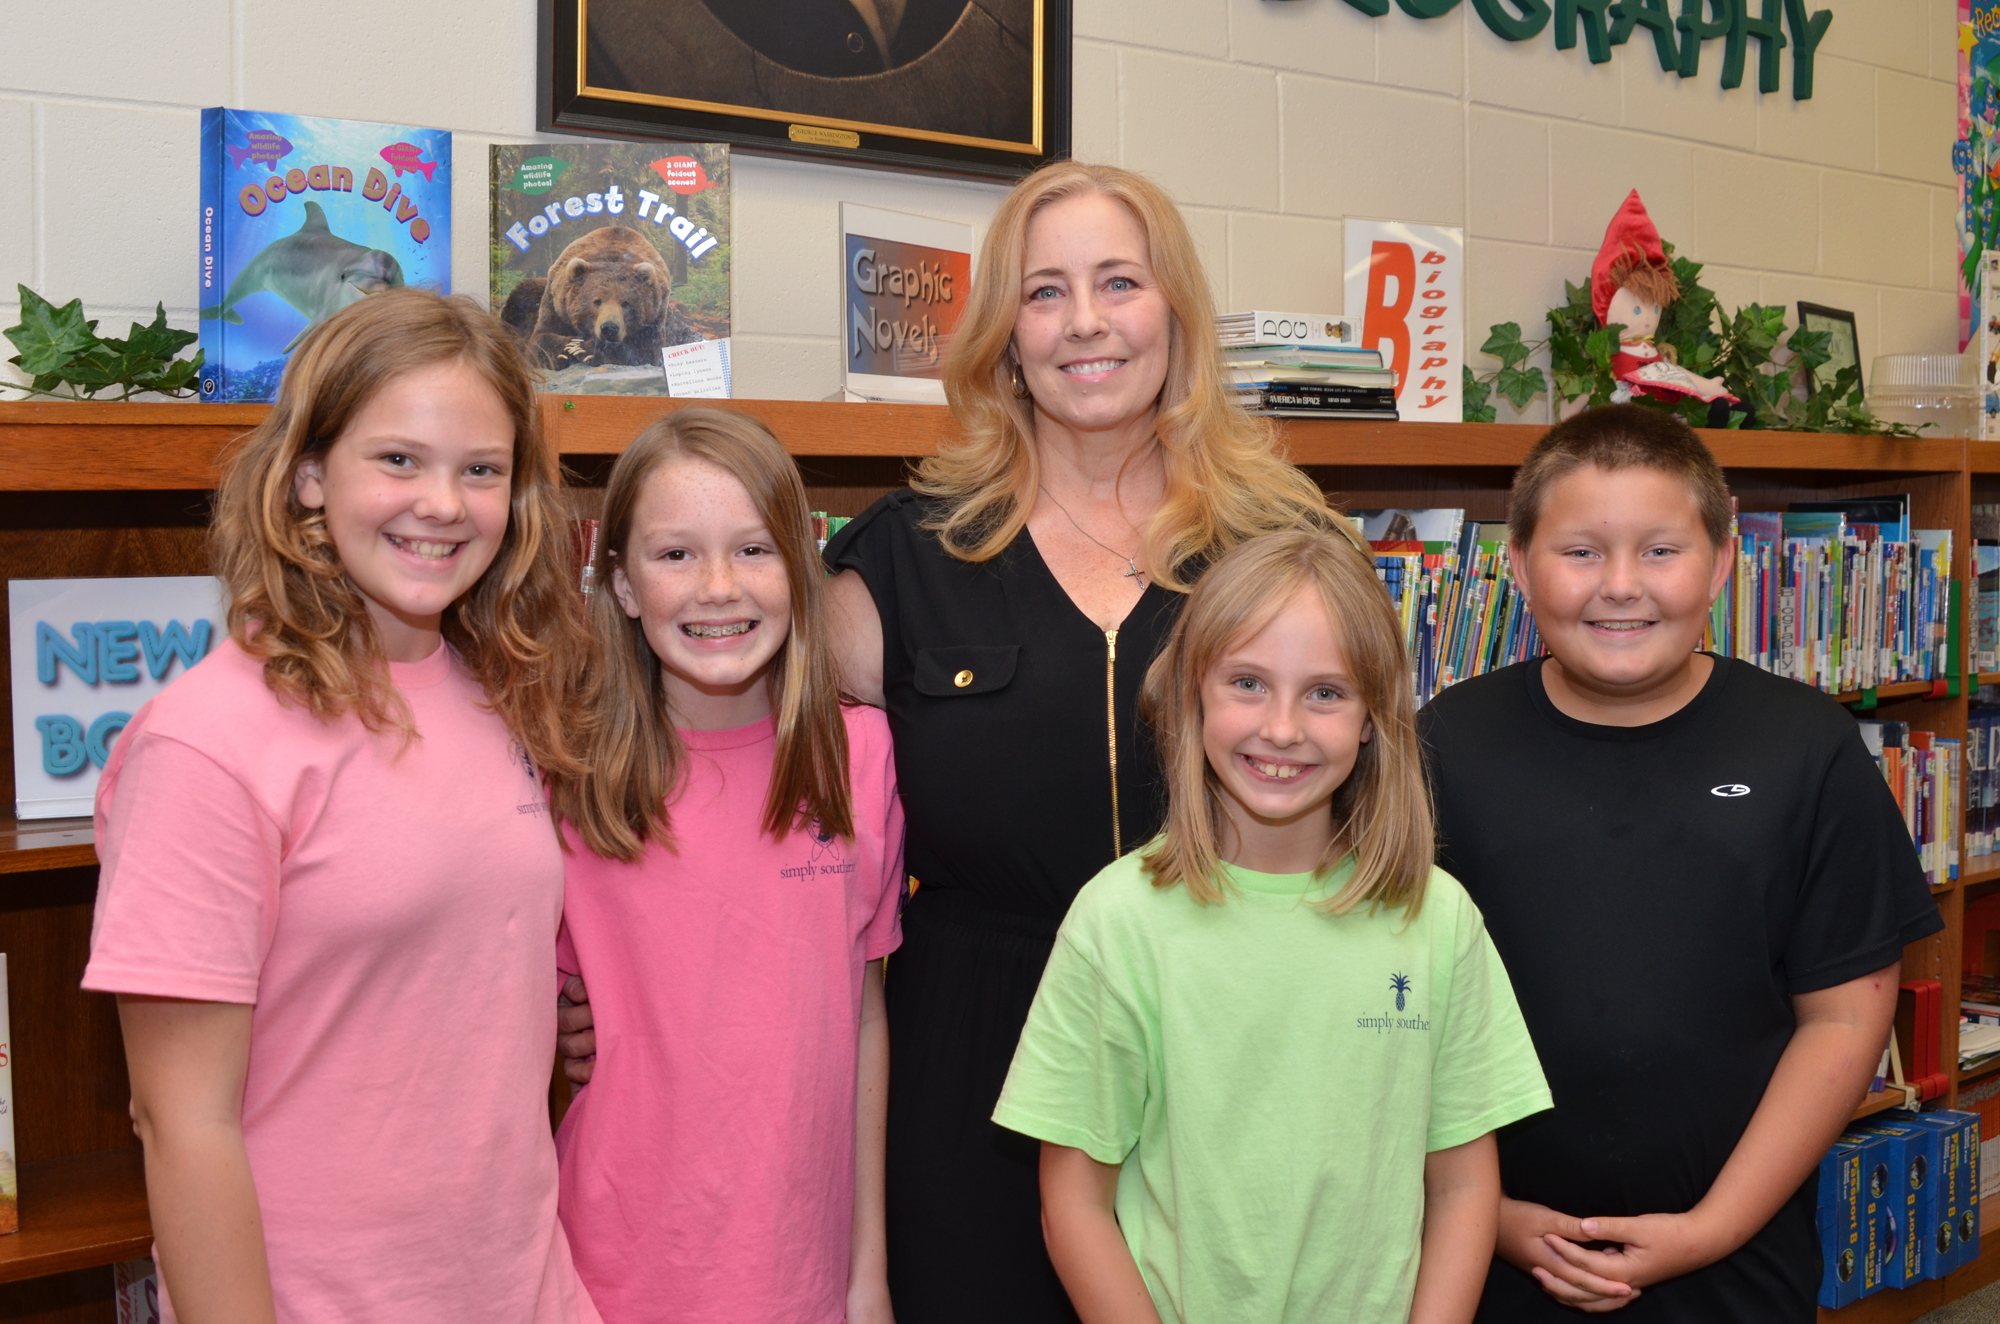 Former students wished Kimmie Laird a happy retirement after 24 years at Dillard Street Elementary: Olivia Sumal, left, Hanna Armstrong, Julia Sumal and Justin Evans.